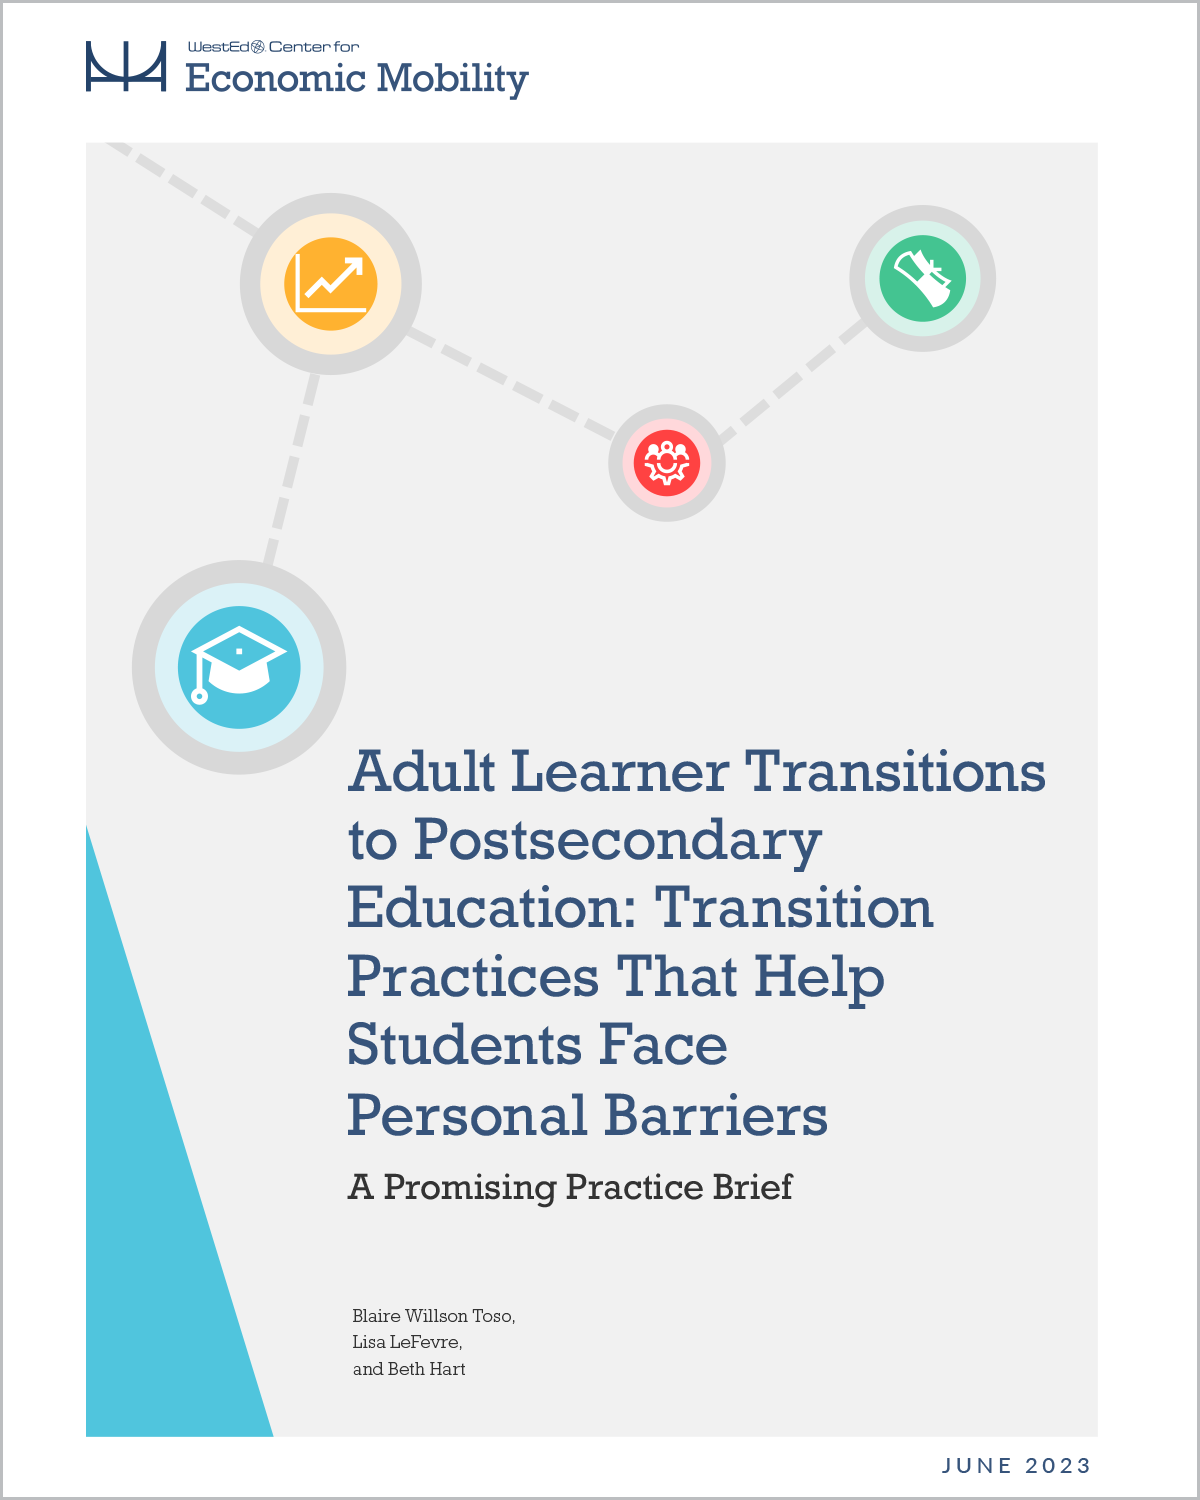 Adult Learner Transitions to Postsecondary Education: Transition Practices That Help Students Face Personal Barriers. A Promising Practice Brief.